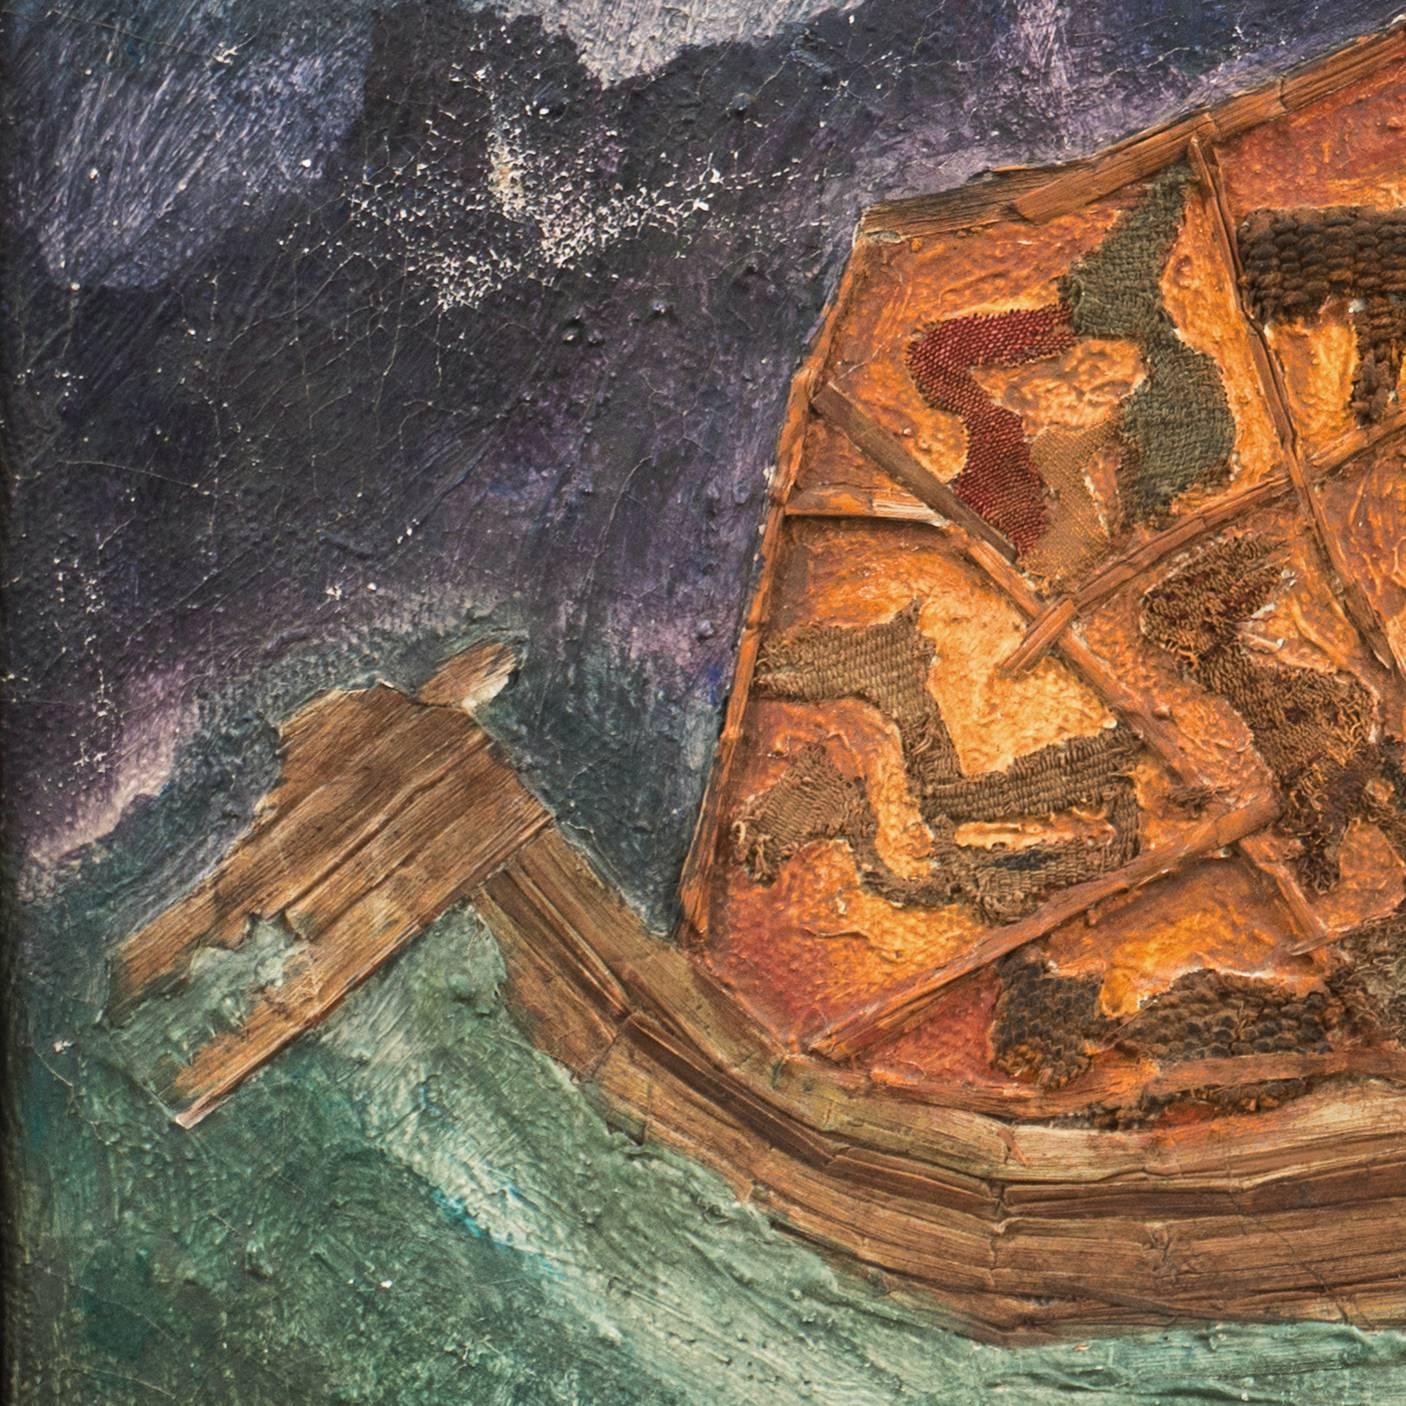 A stunningly original mixed-media collage showing an Ark containing various life-forms and a dove resting in the waves. Fridman has used oil paint, papyrus and pre-columbian textiles to fashion a powerful interpretation of this fundamental symbol of